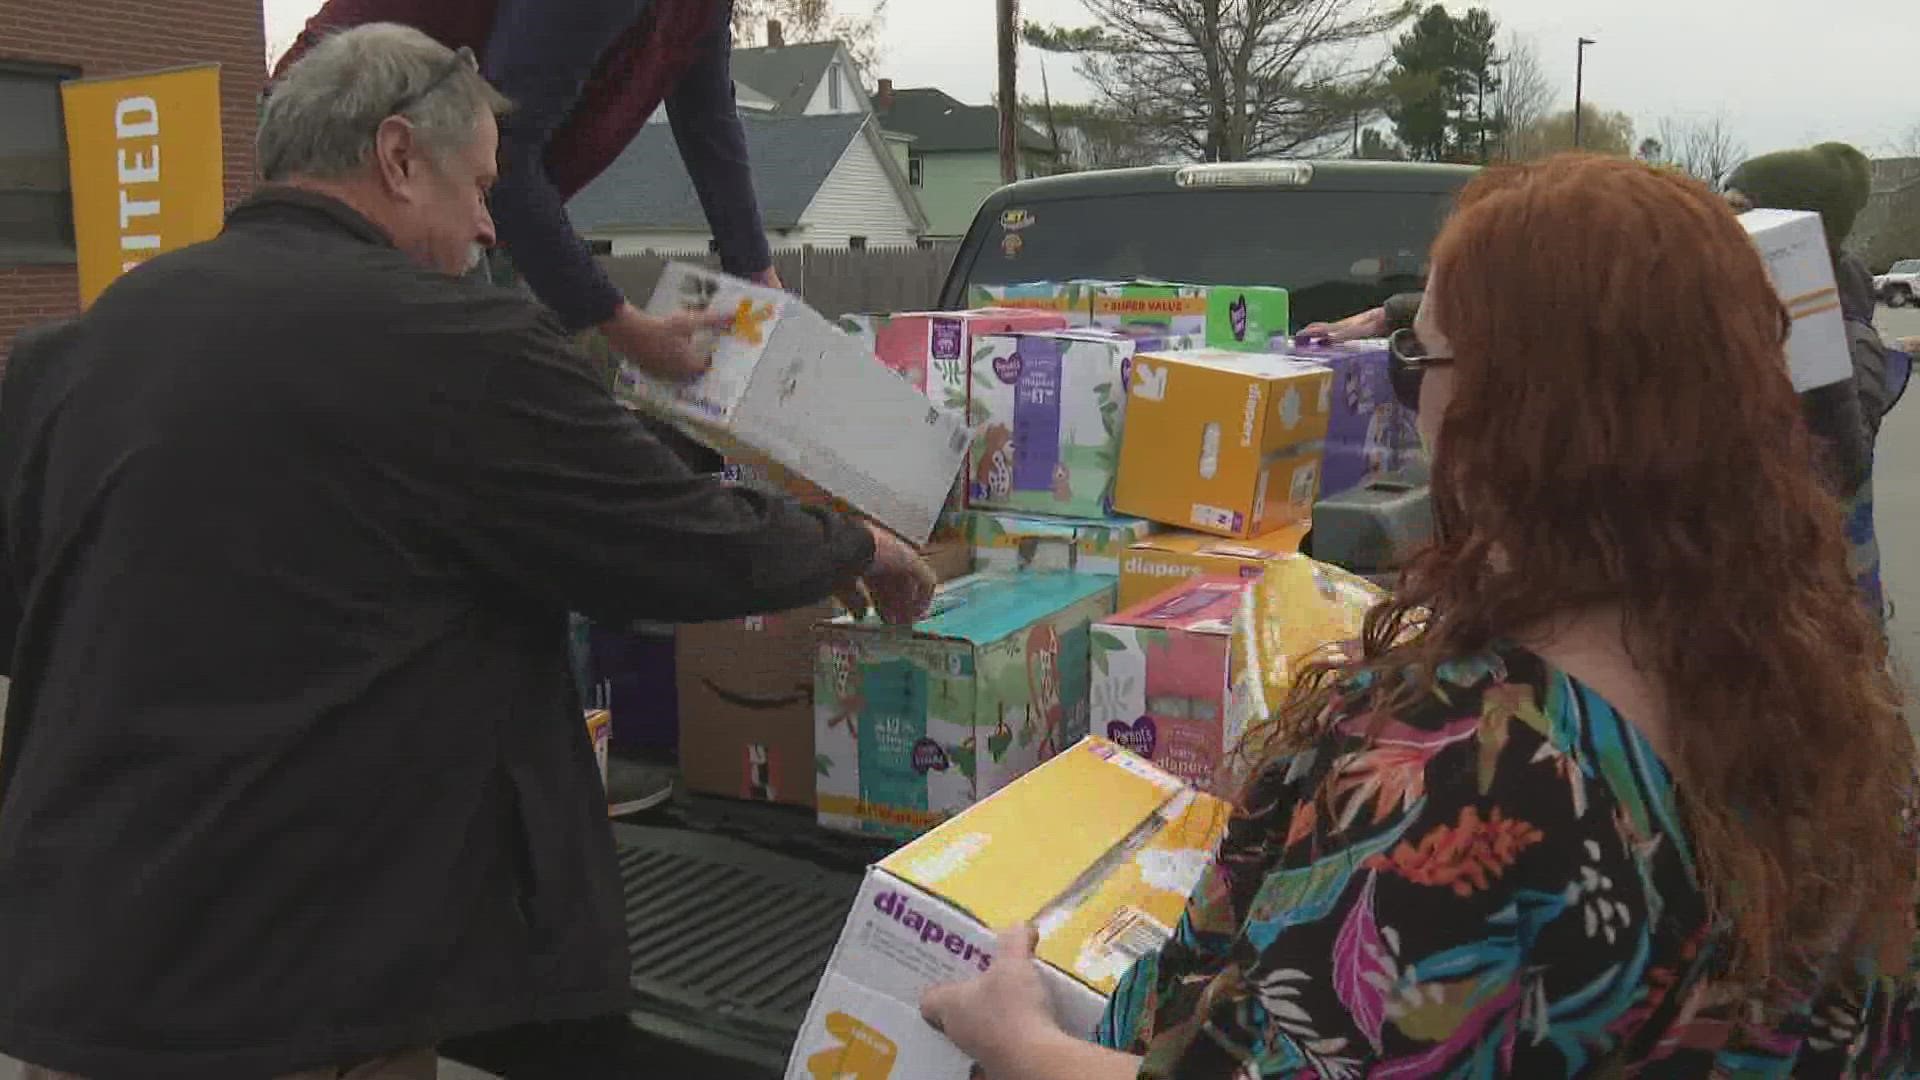 Approximately 1 in 3 families nationwide report a need for diapers.